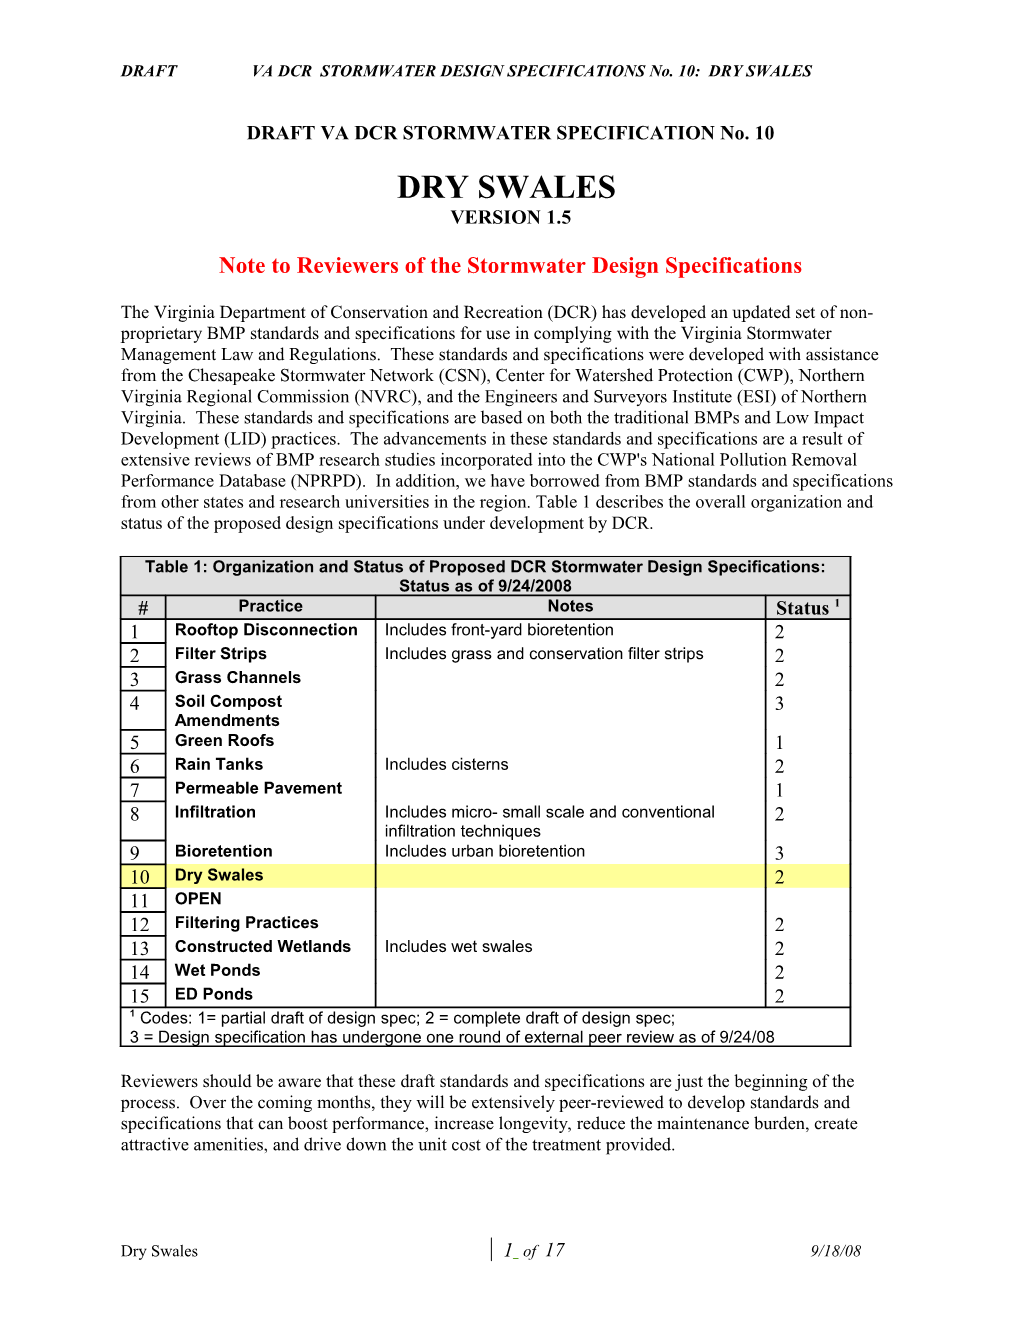 DRAFT VA DCR STORMWATER DESIGN SPECIFICATIONS No. 10: DRY SWALES